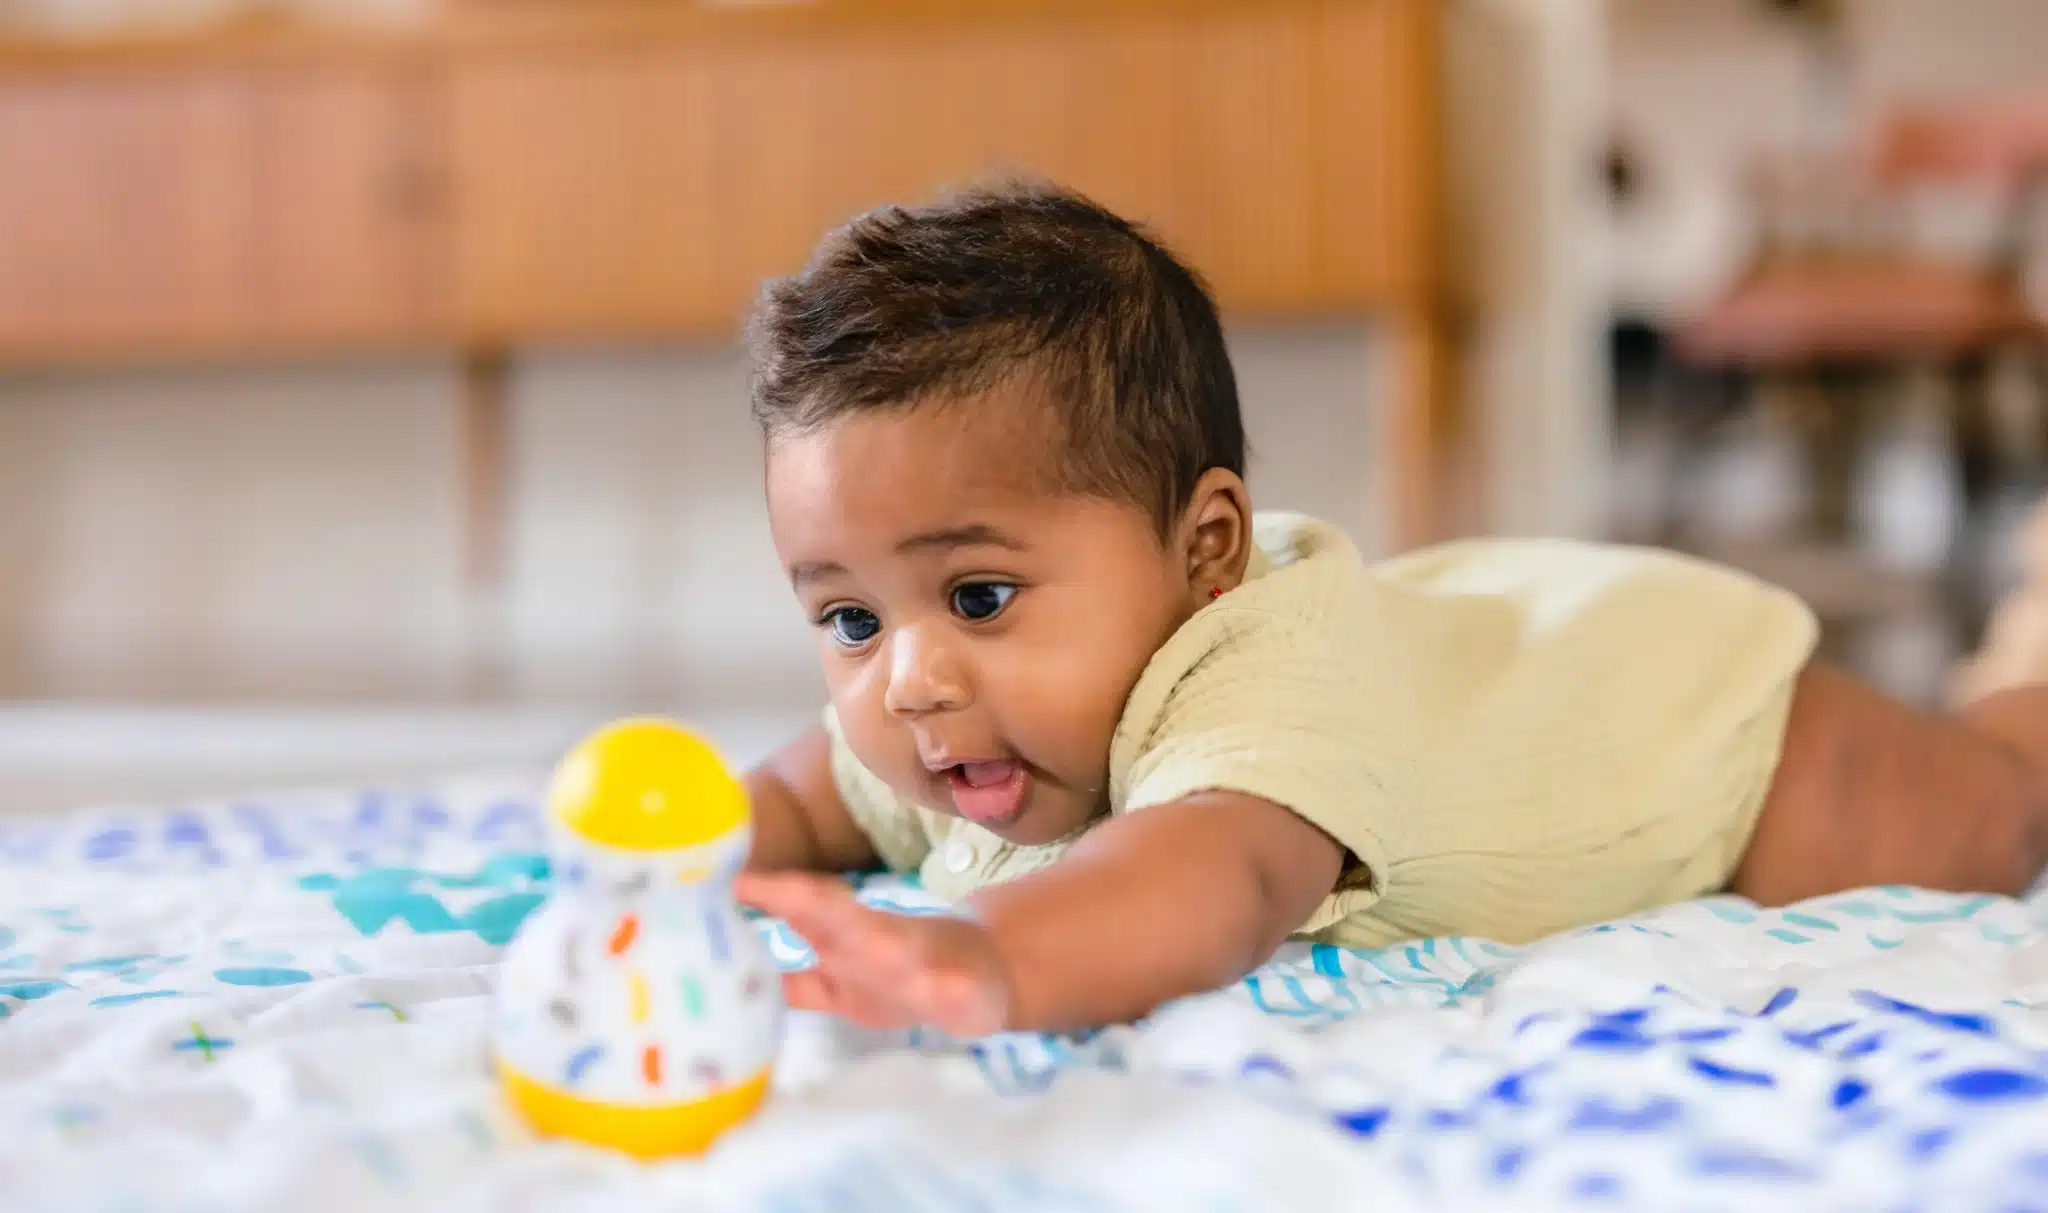 A baby joyfully engages with a toy on a soft blanket, exploring new developments during the 4-6 month stage of growth